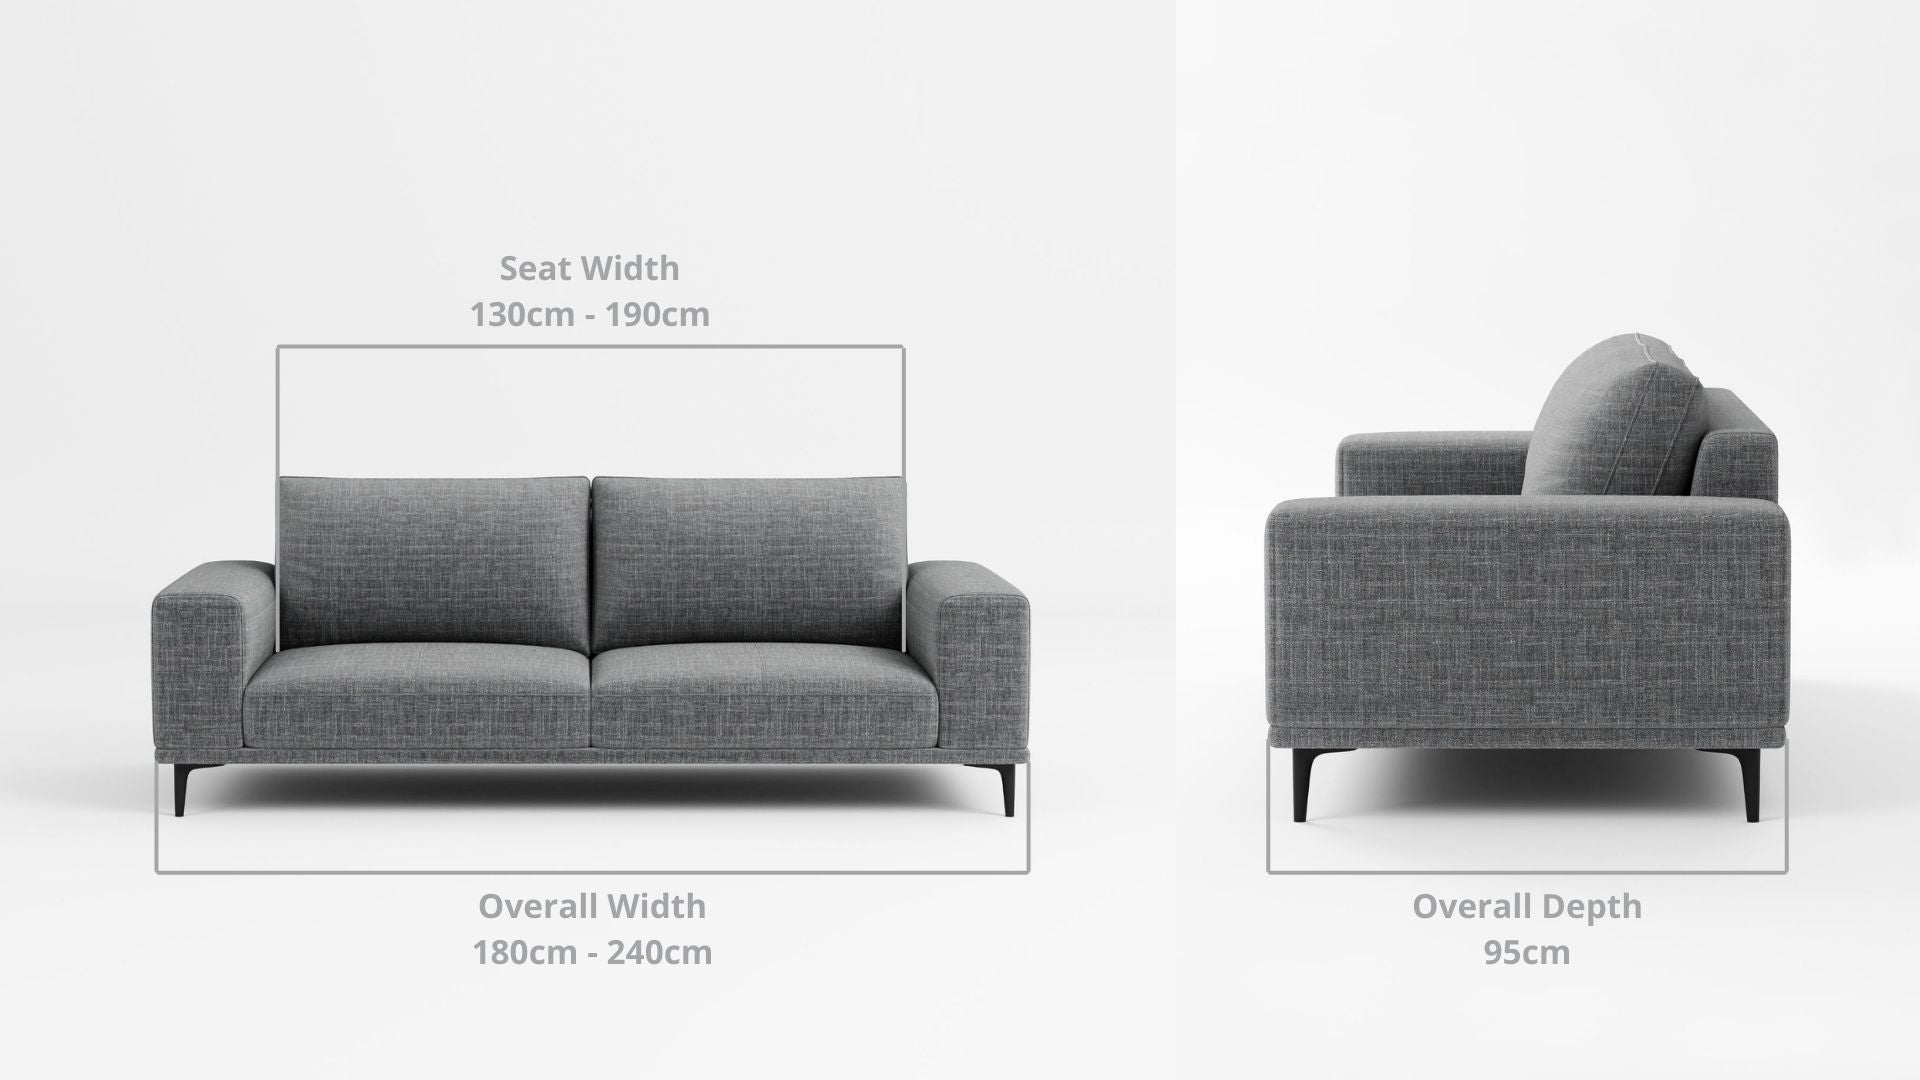 Details the key dimensions in terms of overall width, overall depth and seat width for Calm Fabric Sofa